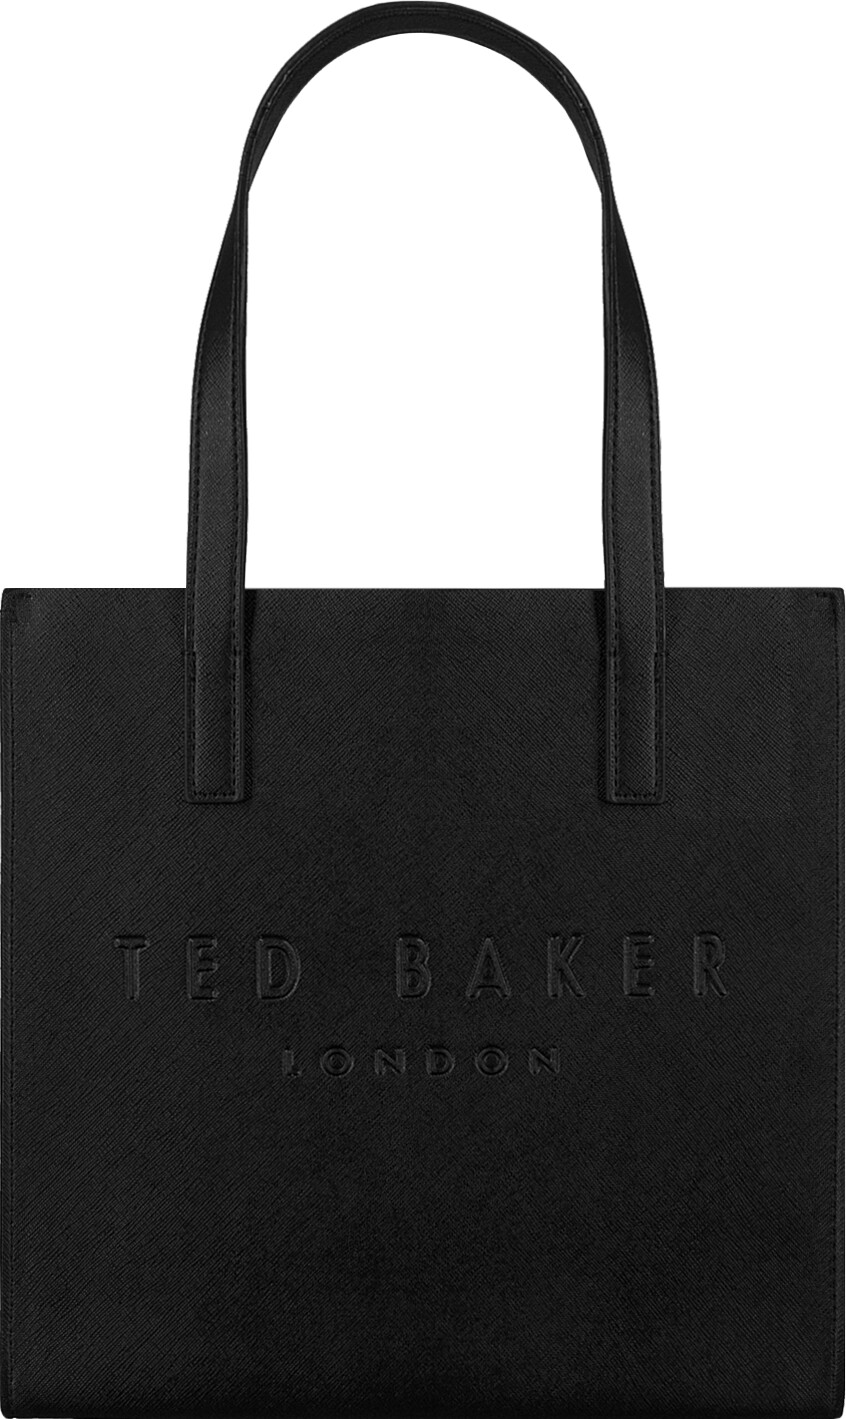 Buy Ted Baker Seacon black from £35.00 (Today) – Best Deals on